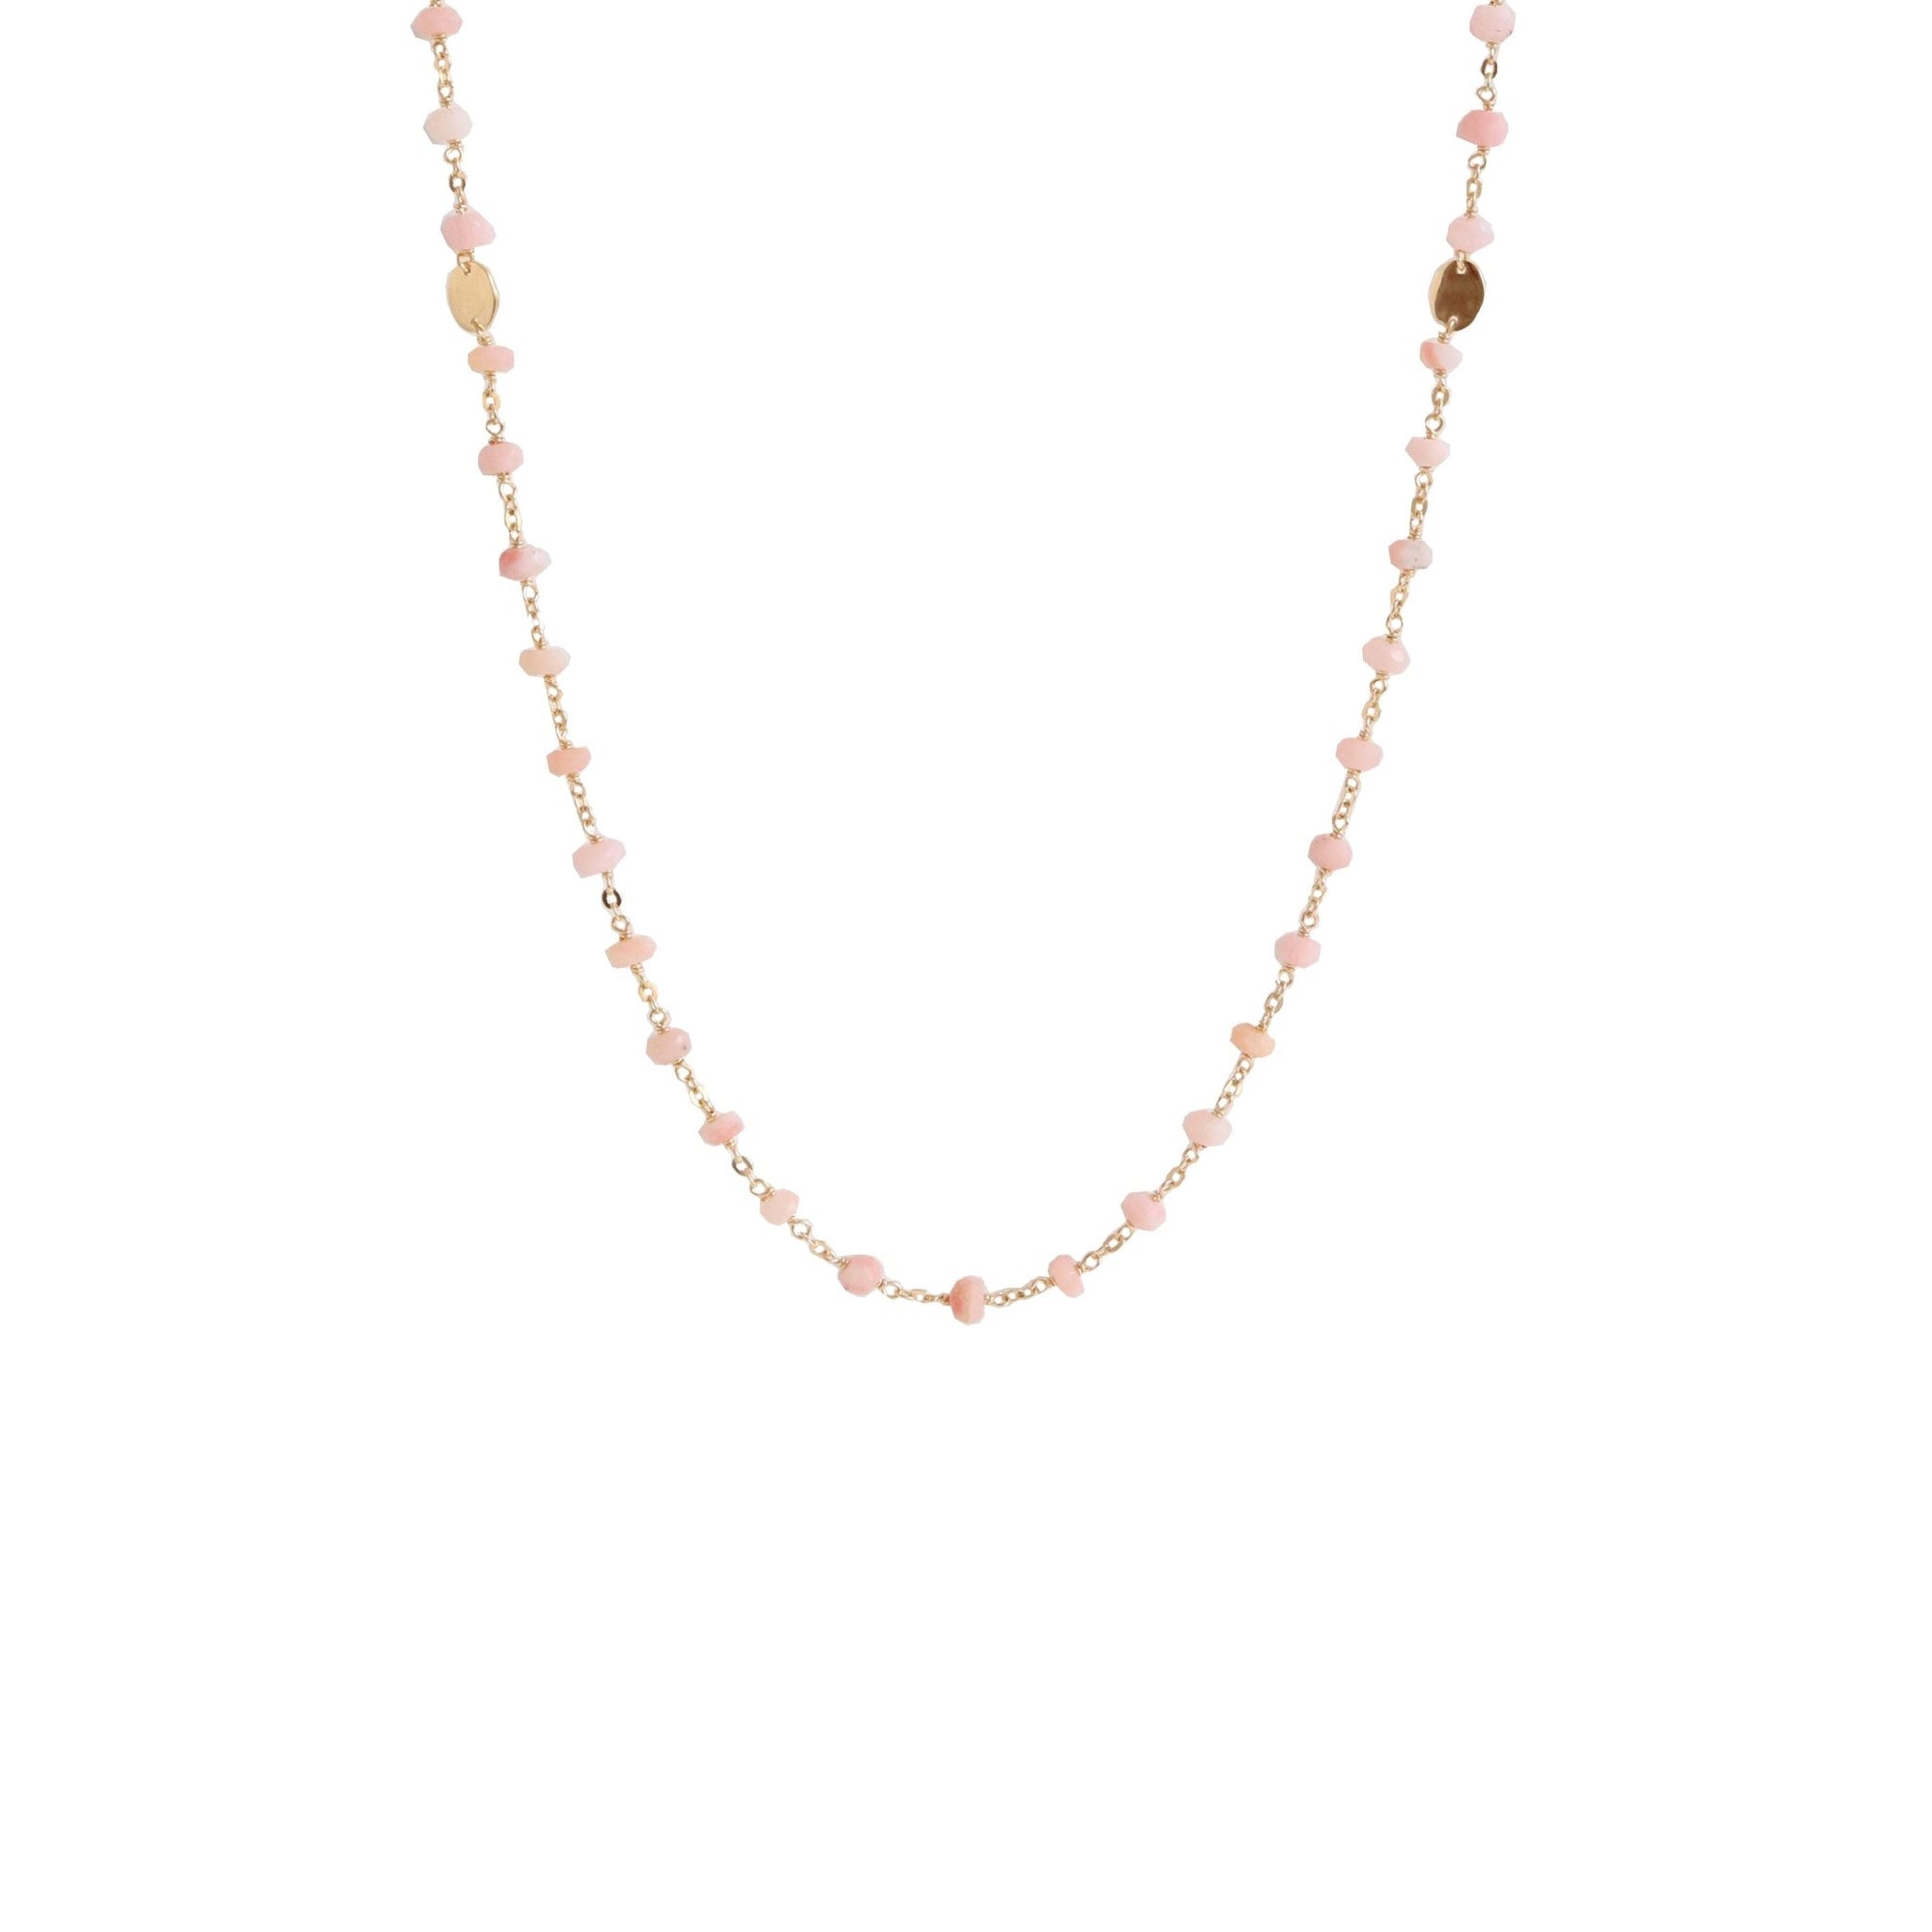 ICONIC MIDI BEADED NECKLACE - PINK OPAL & GOLD 24-25" - SO PRETTY CARA COTTER